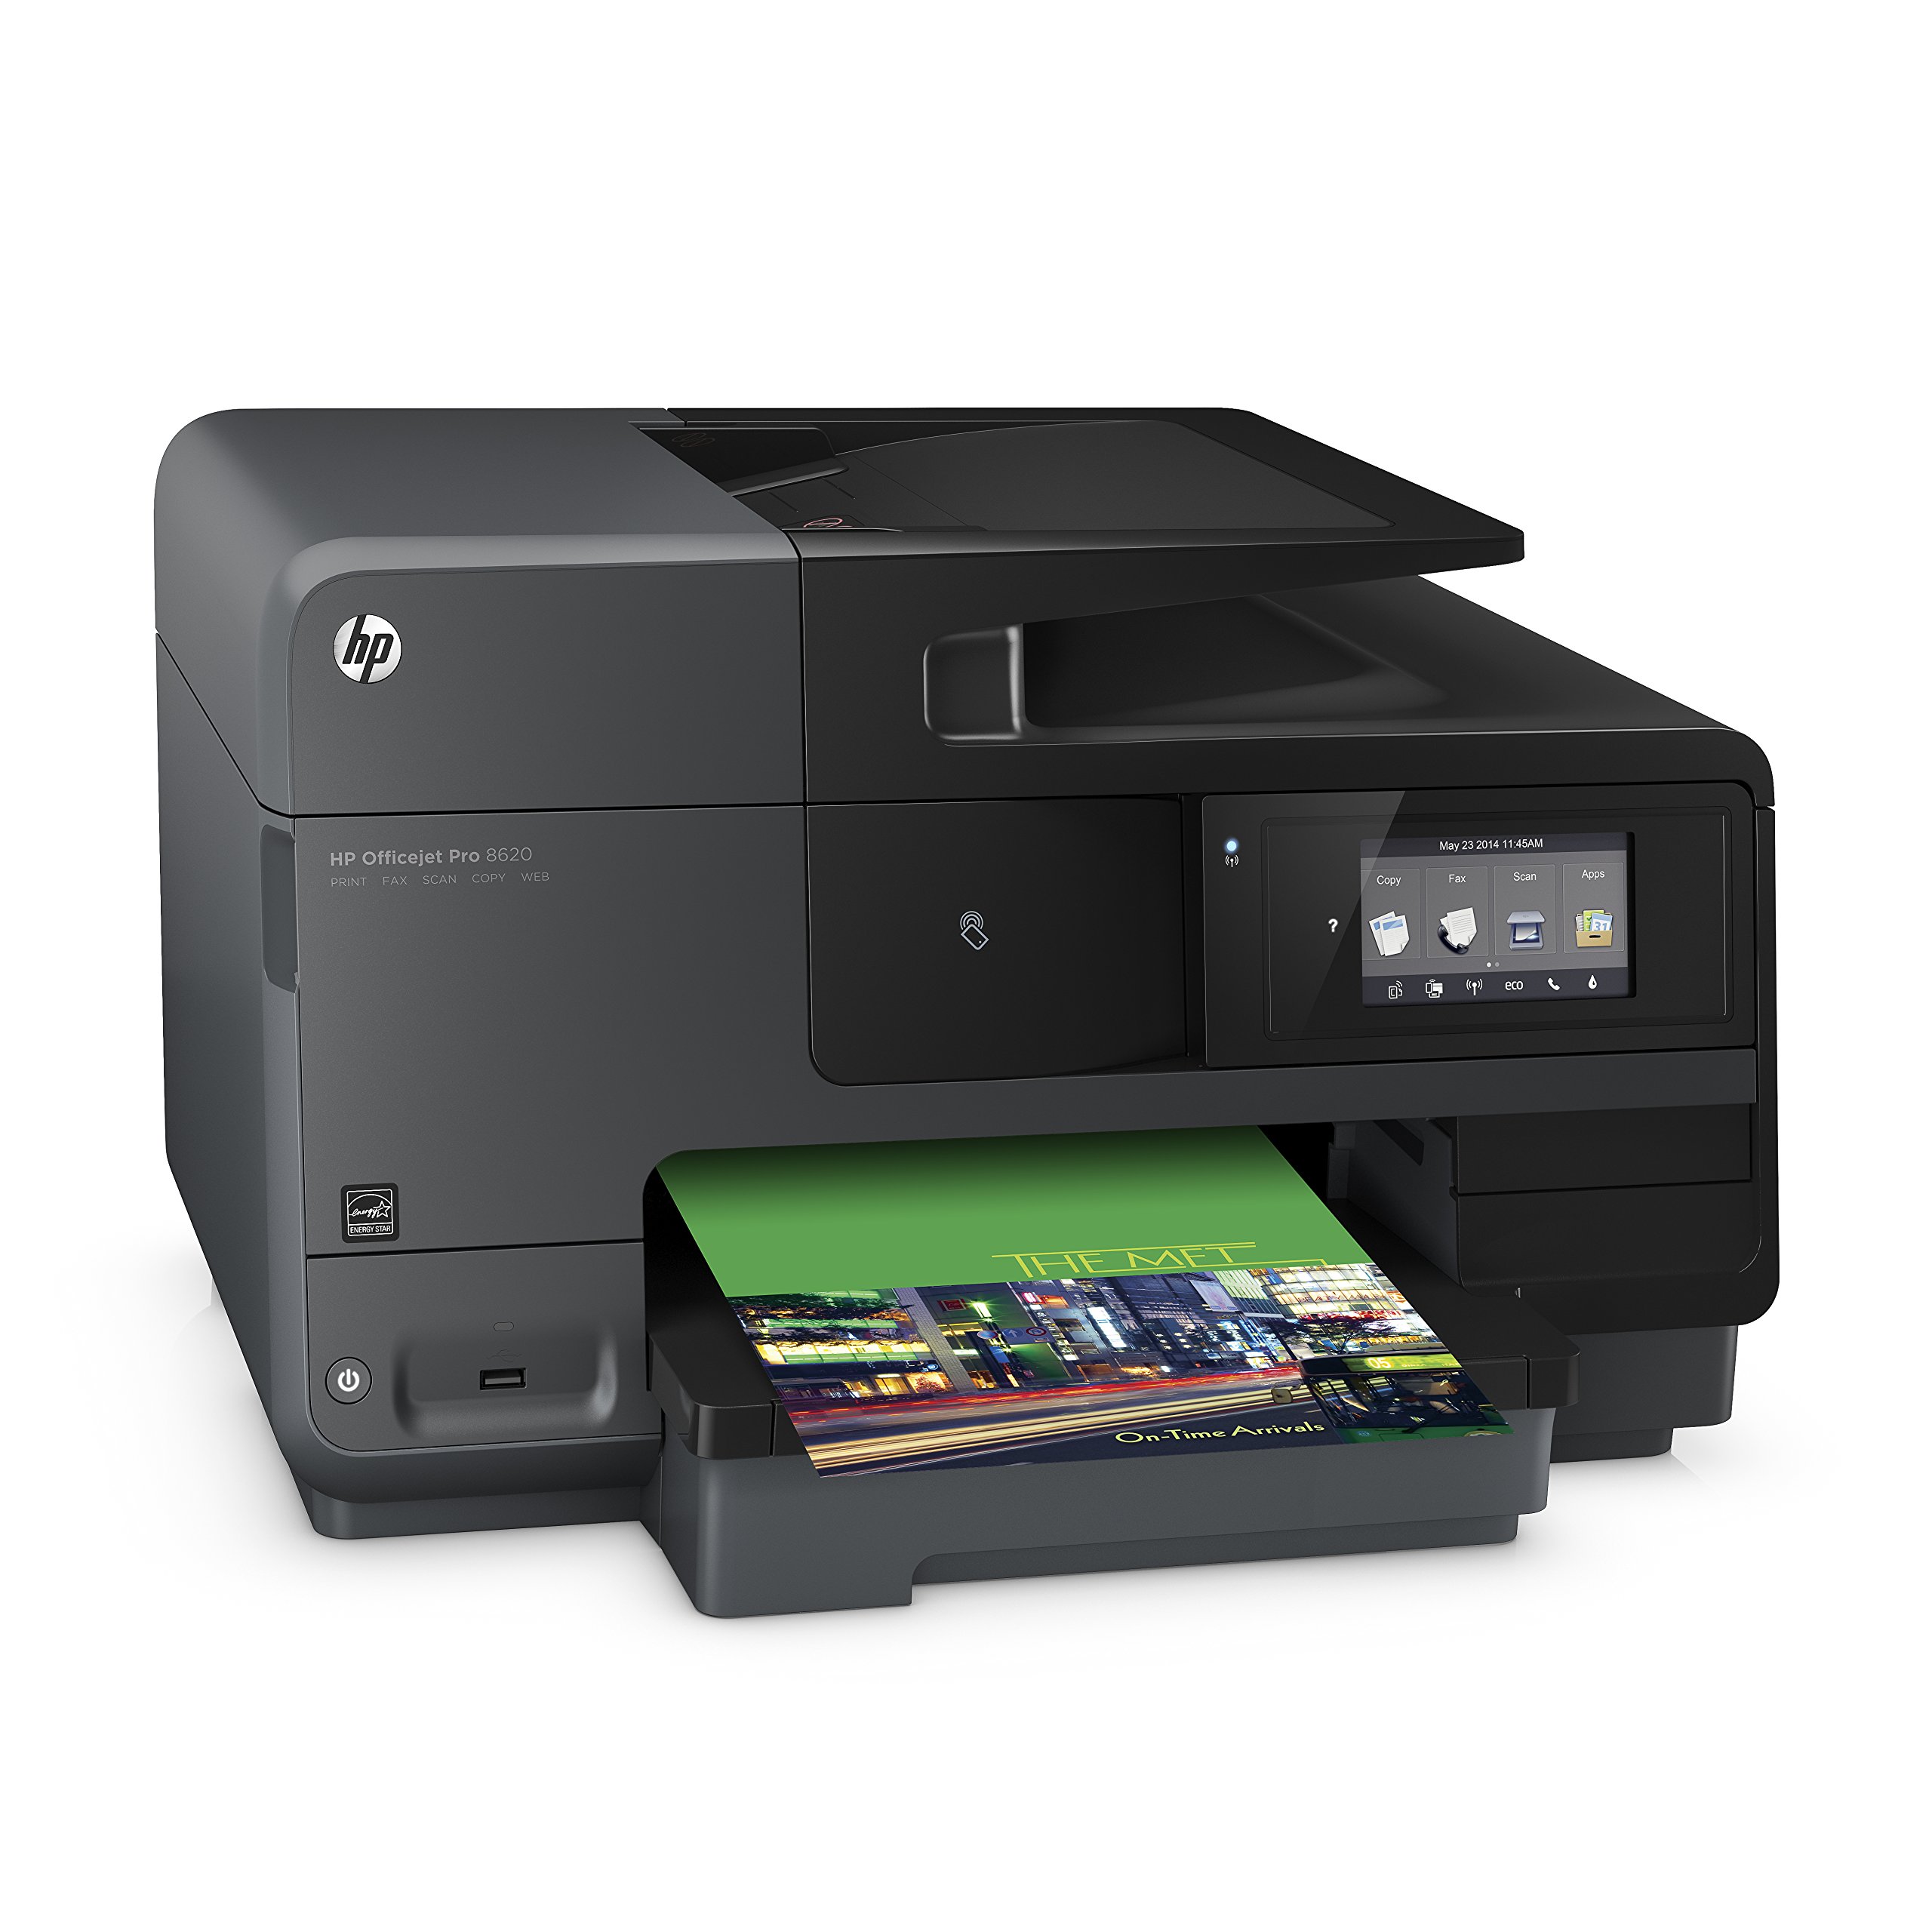 Officejet Pro 8620 e-All-in-One Printer